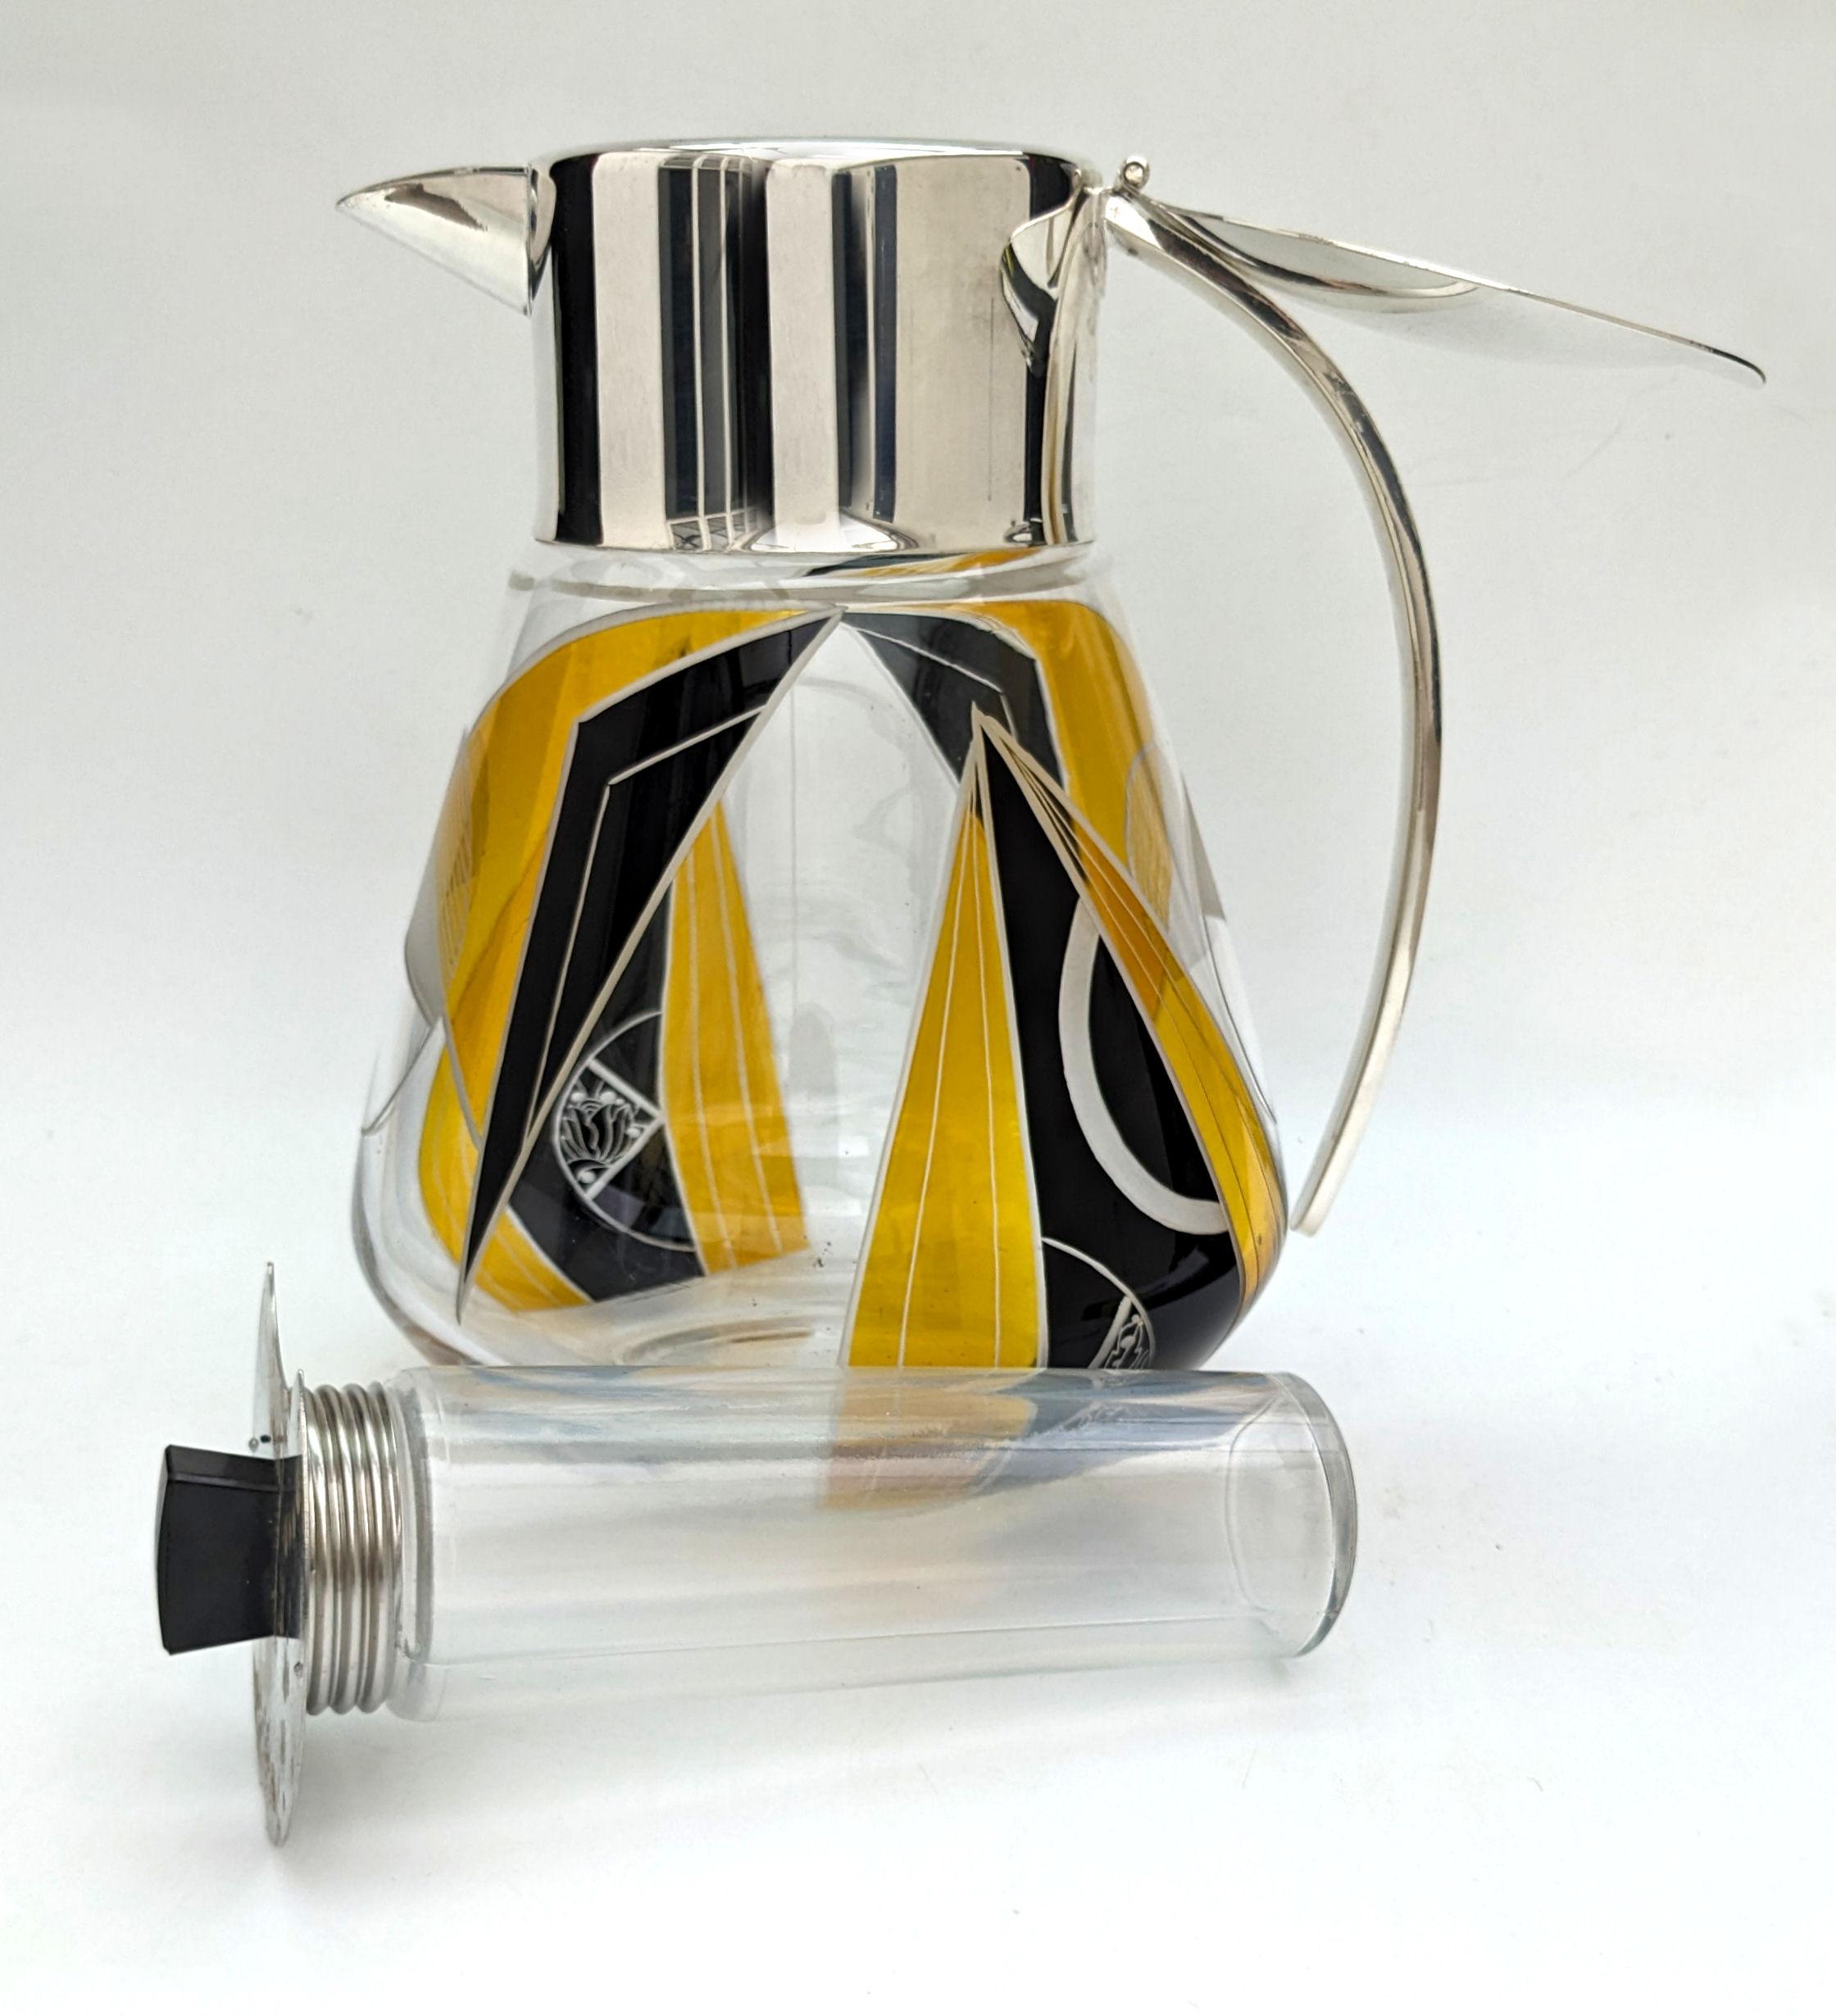 20th Century Art Deco Cut Glass Silver Plated Drinks Pitcher, Karl Palda, c1930 For Sale